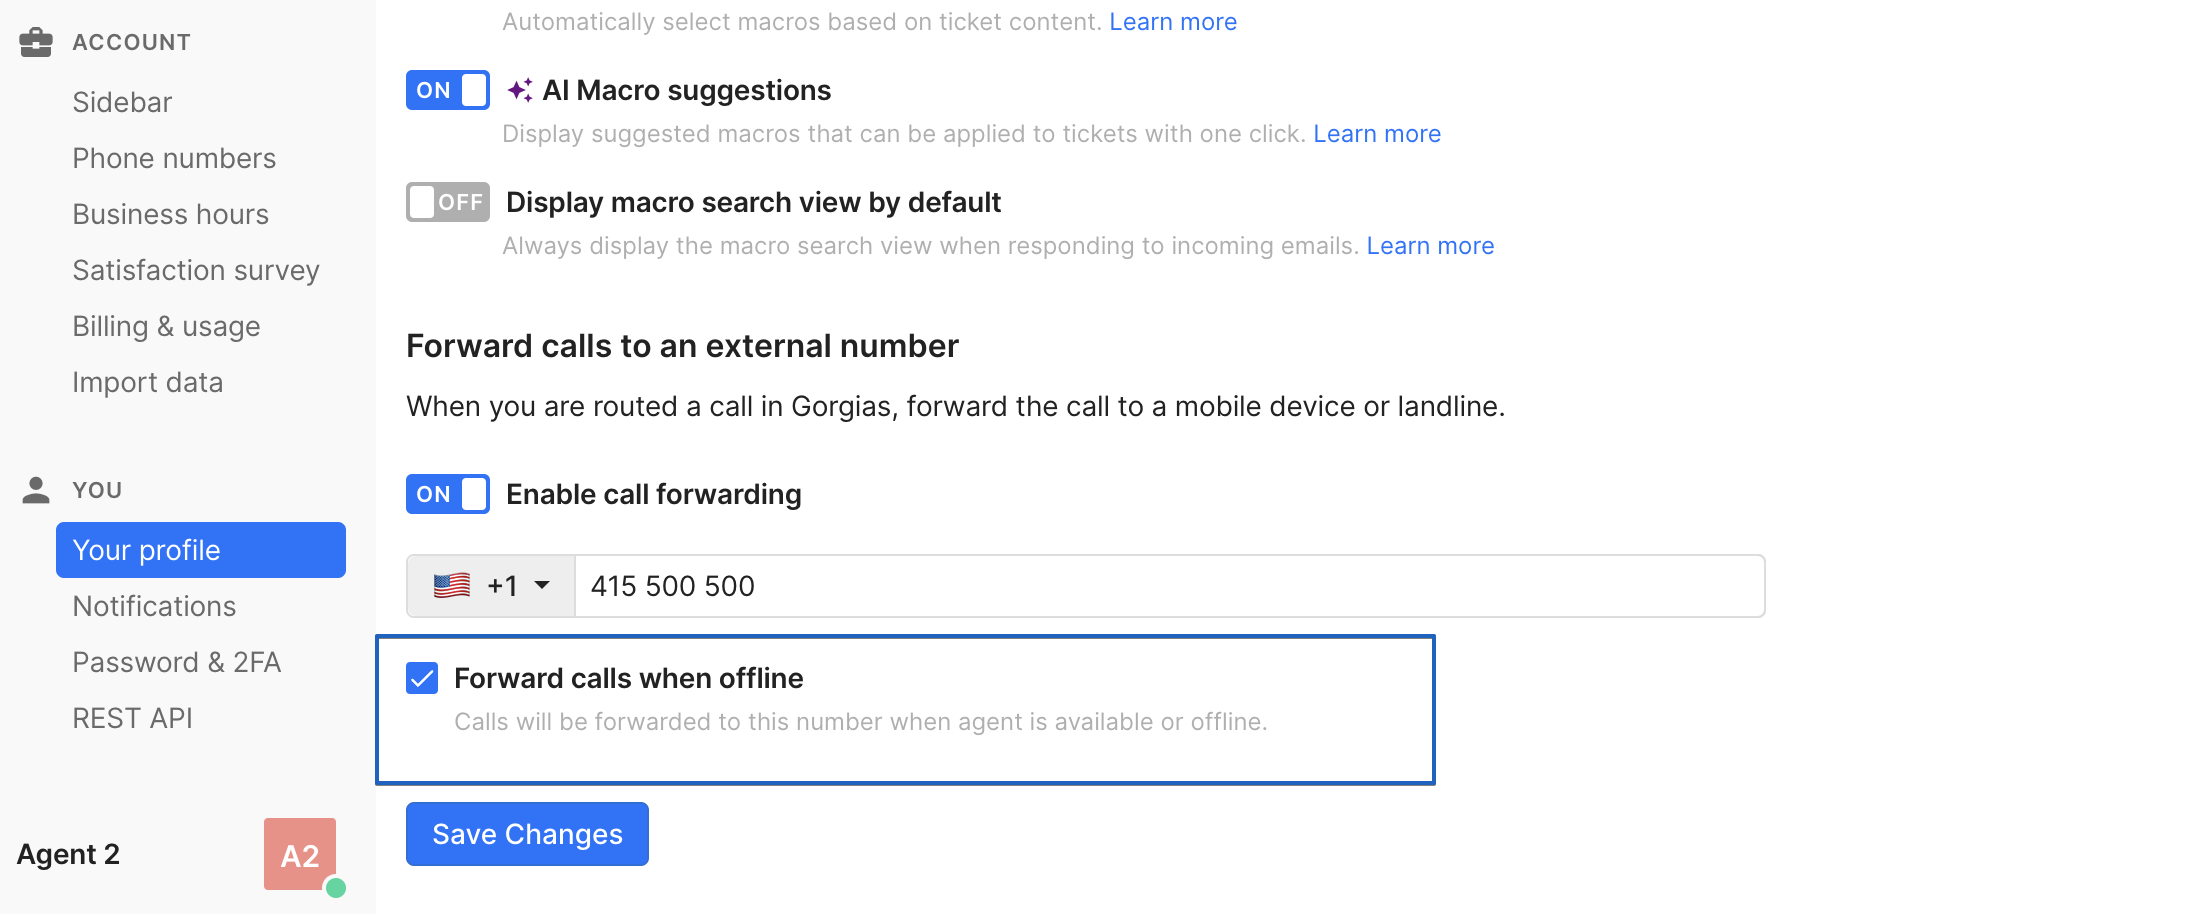 Stay Connected: Forward Calls to Your Mobile Device While Offline! 📞